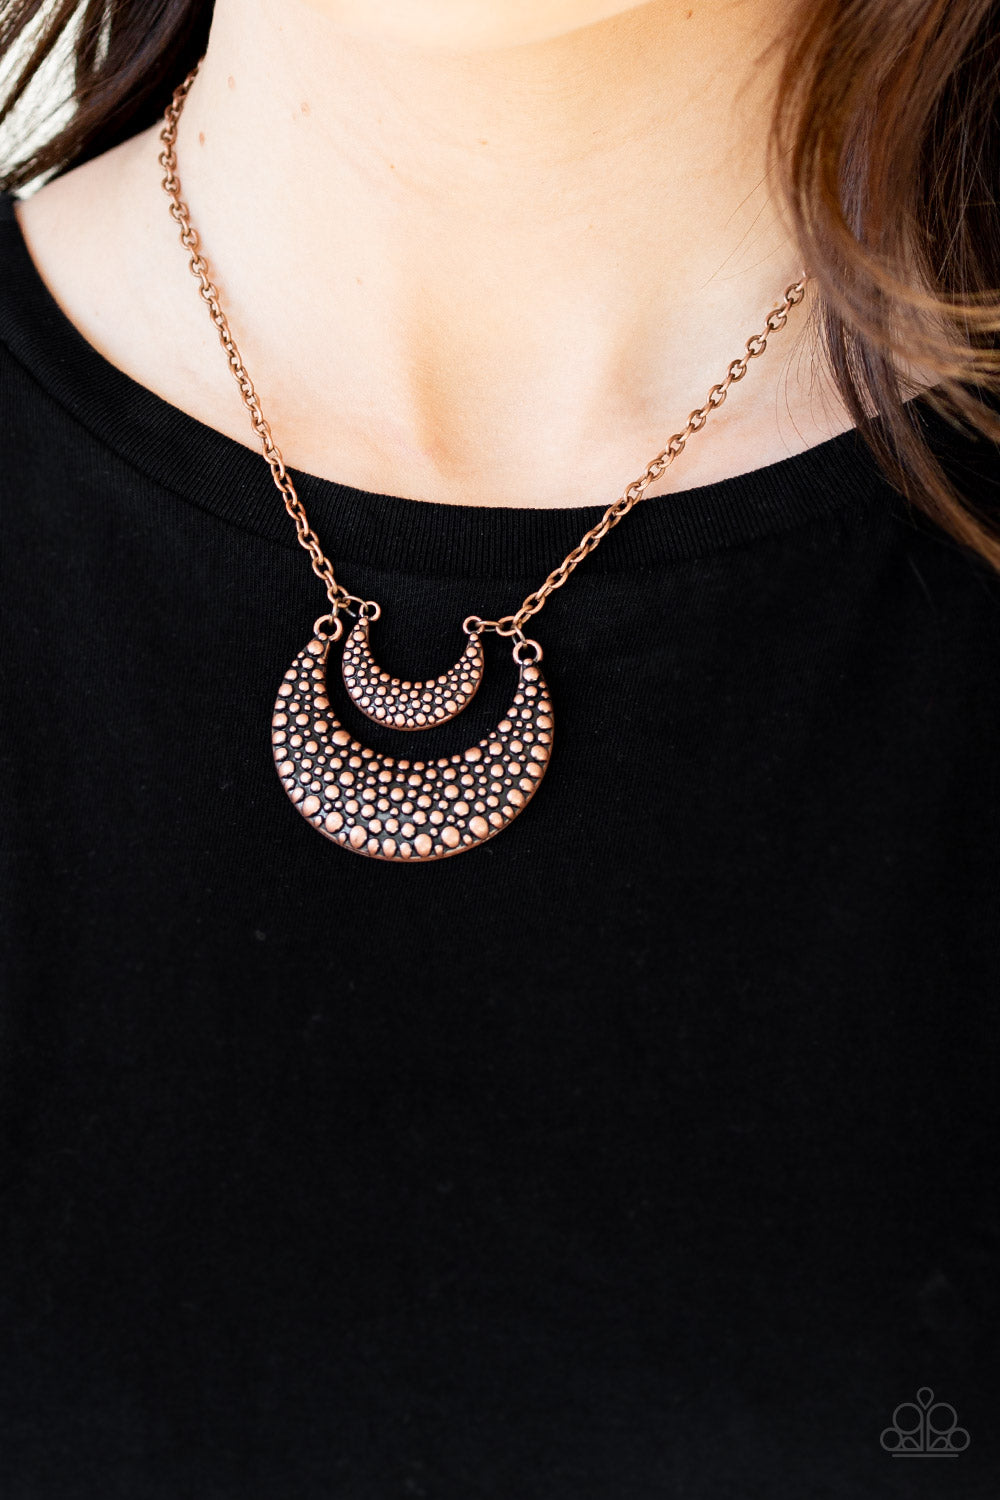 Get Well MOON - Copper necklace